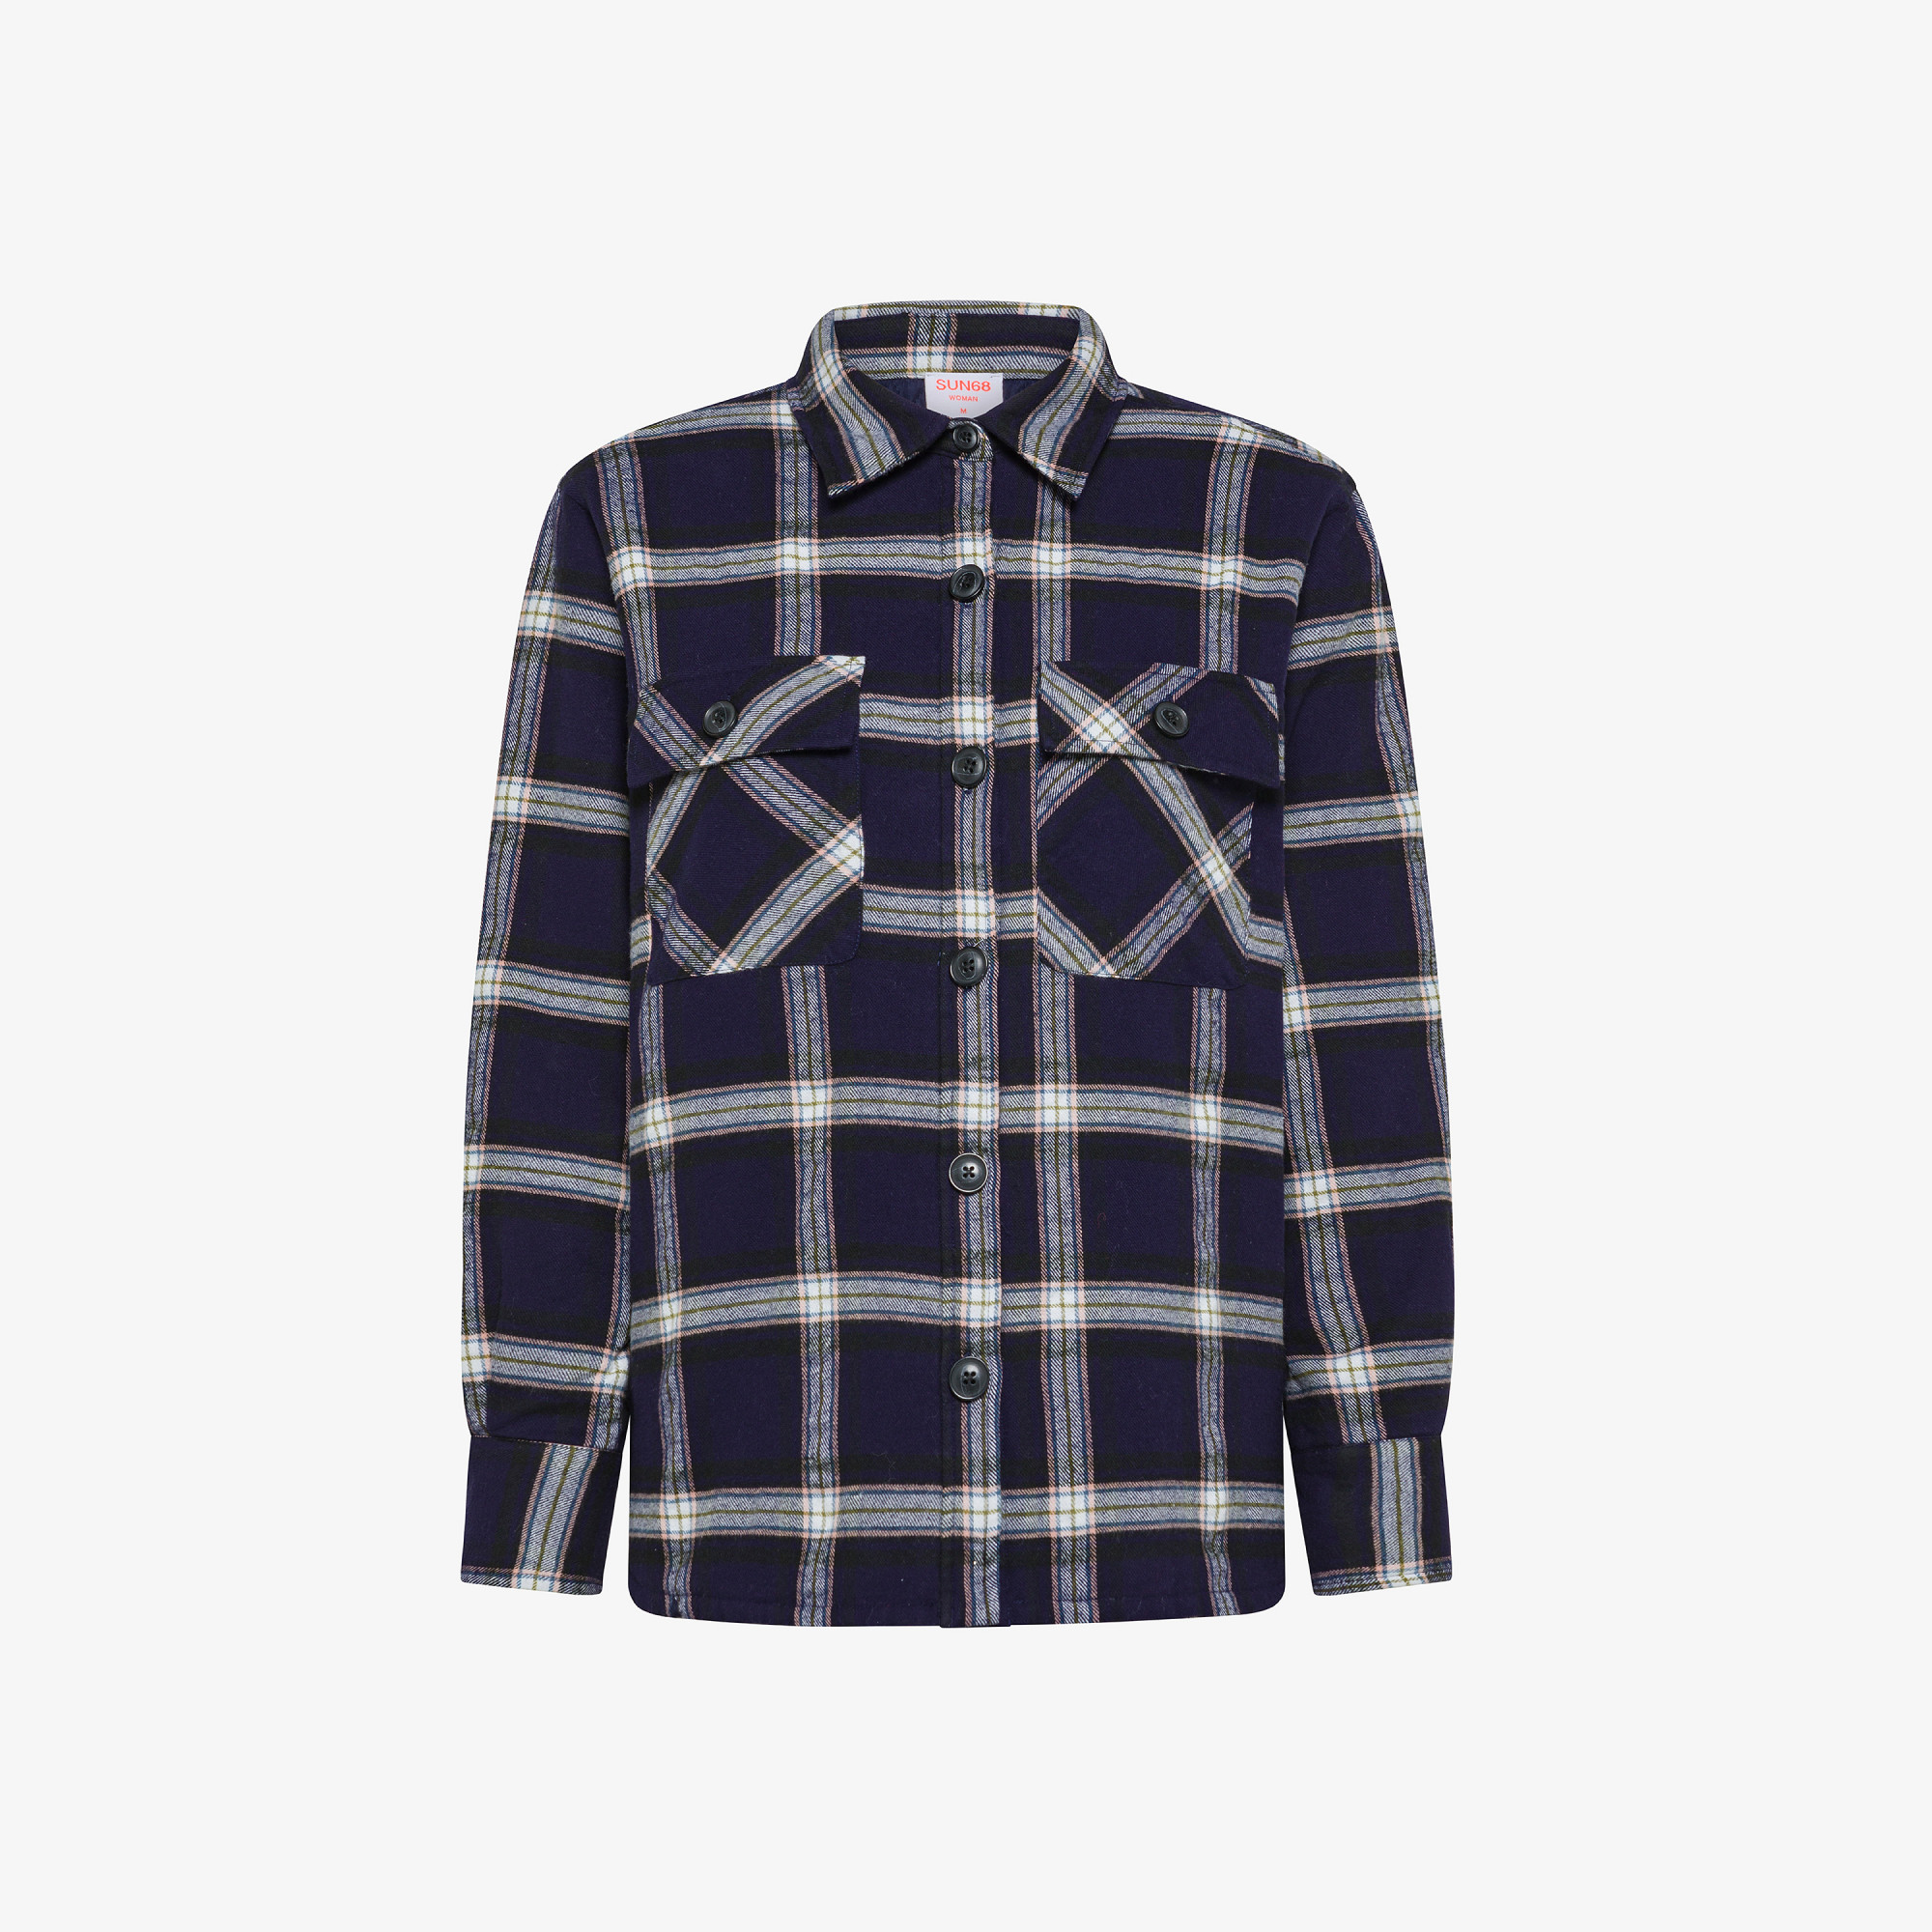 SHIRT WITH POCKETS L/S NAVY BLUE/OFF WHITE